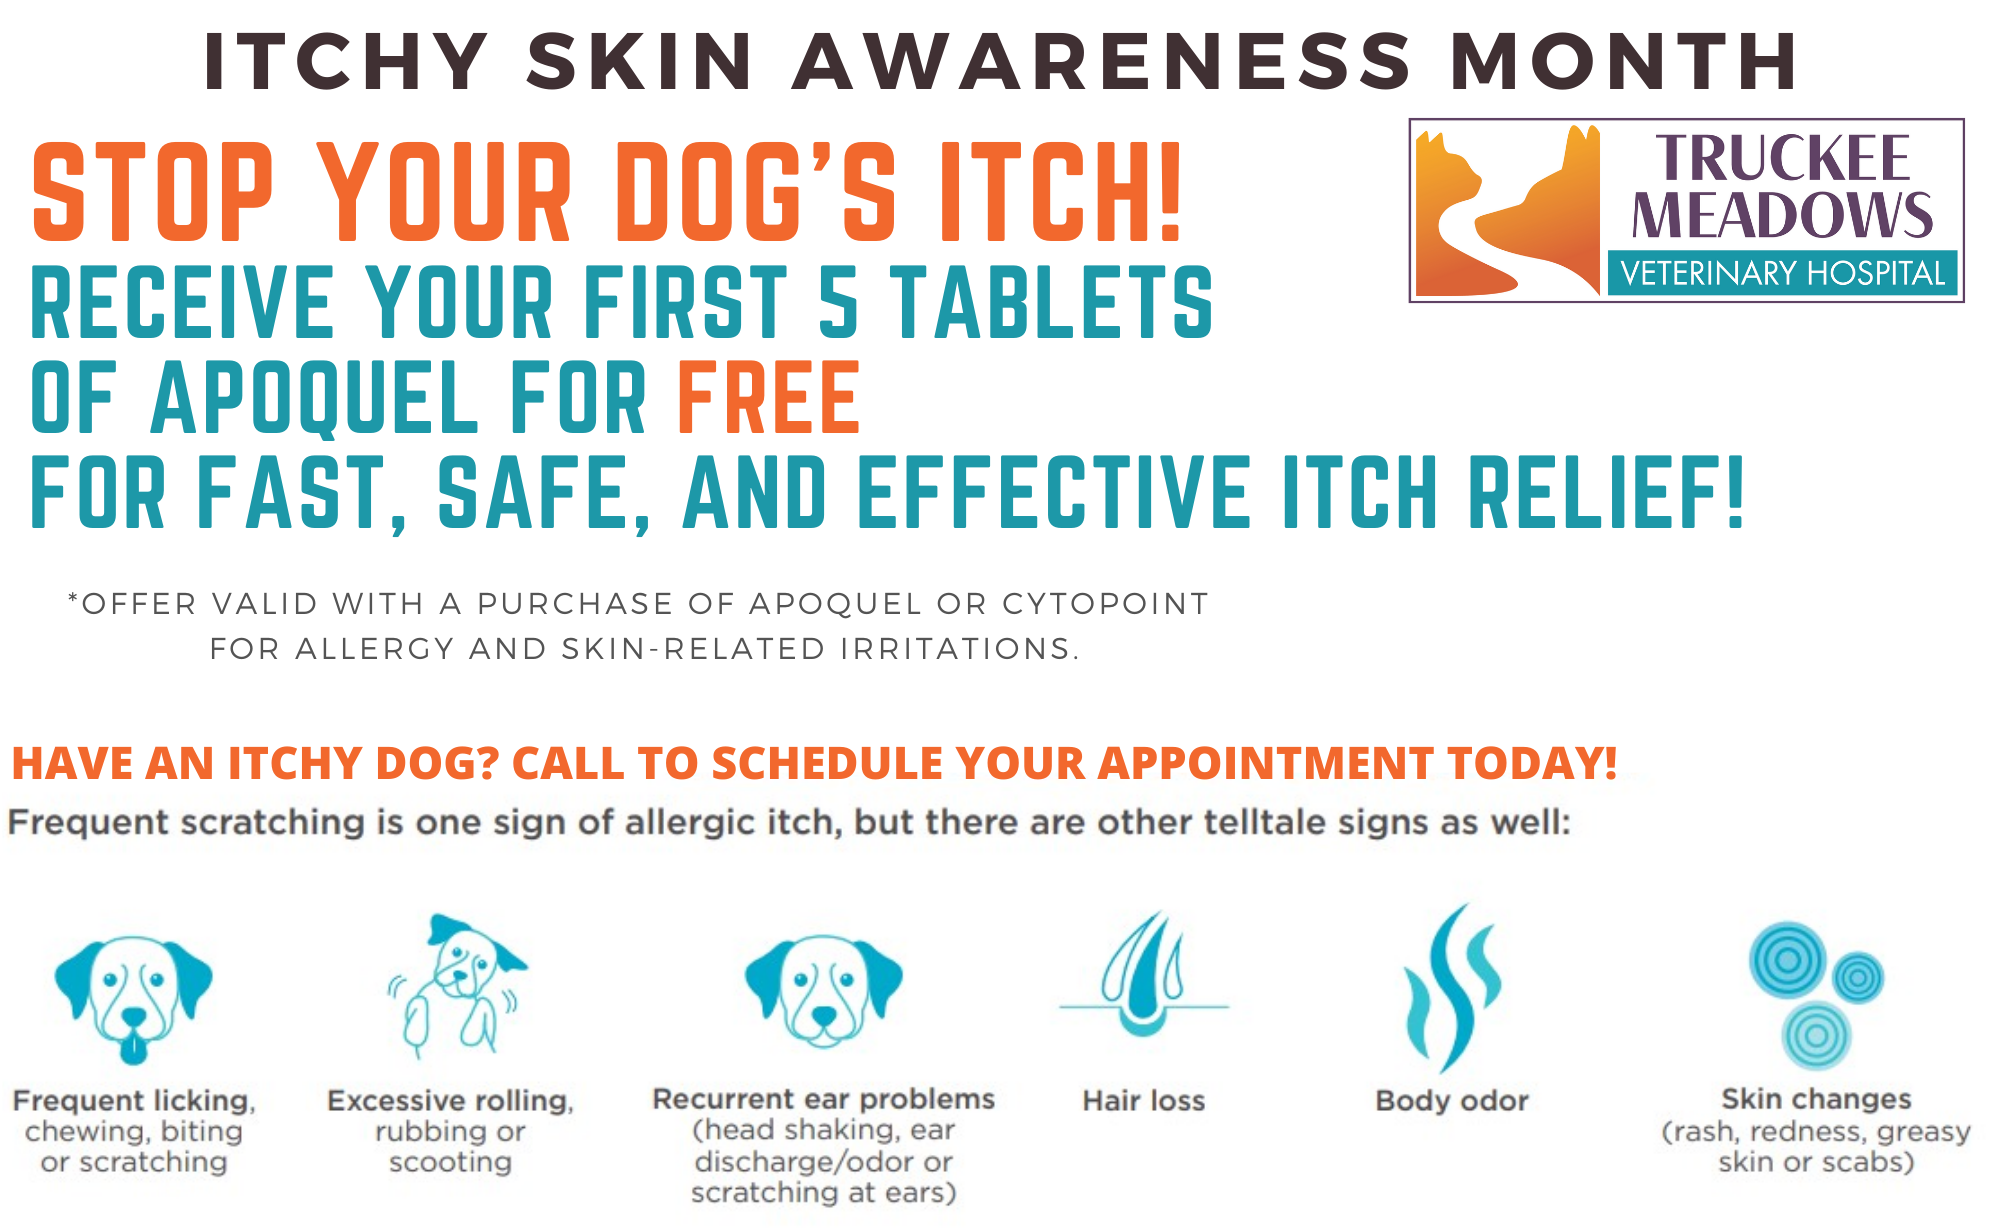 receive-your-first-5-tablets-of-apoquel-for-free-truckee-meadows